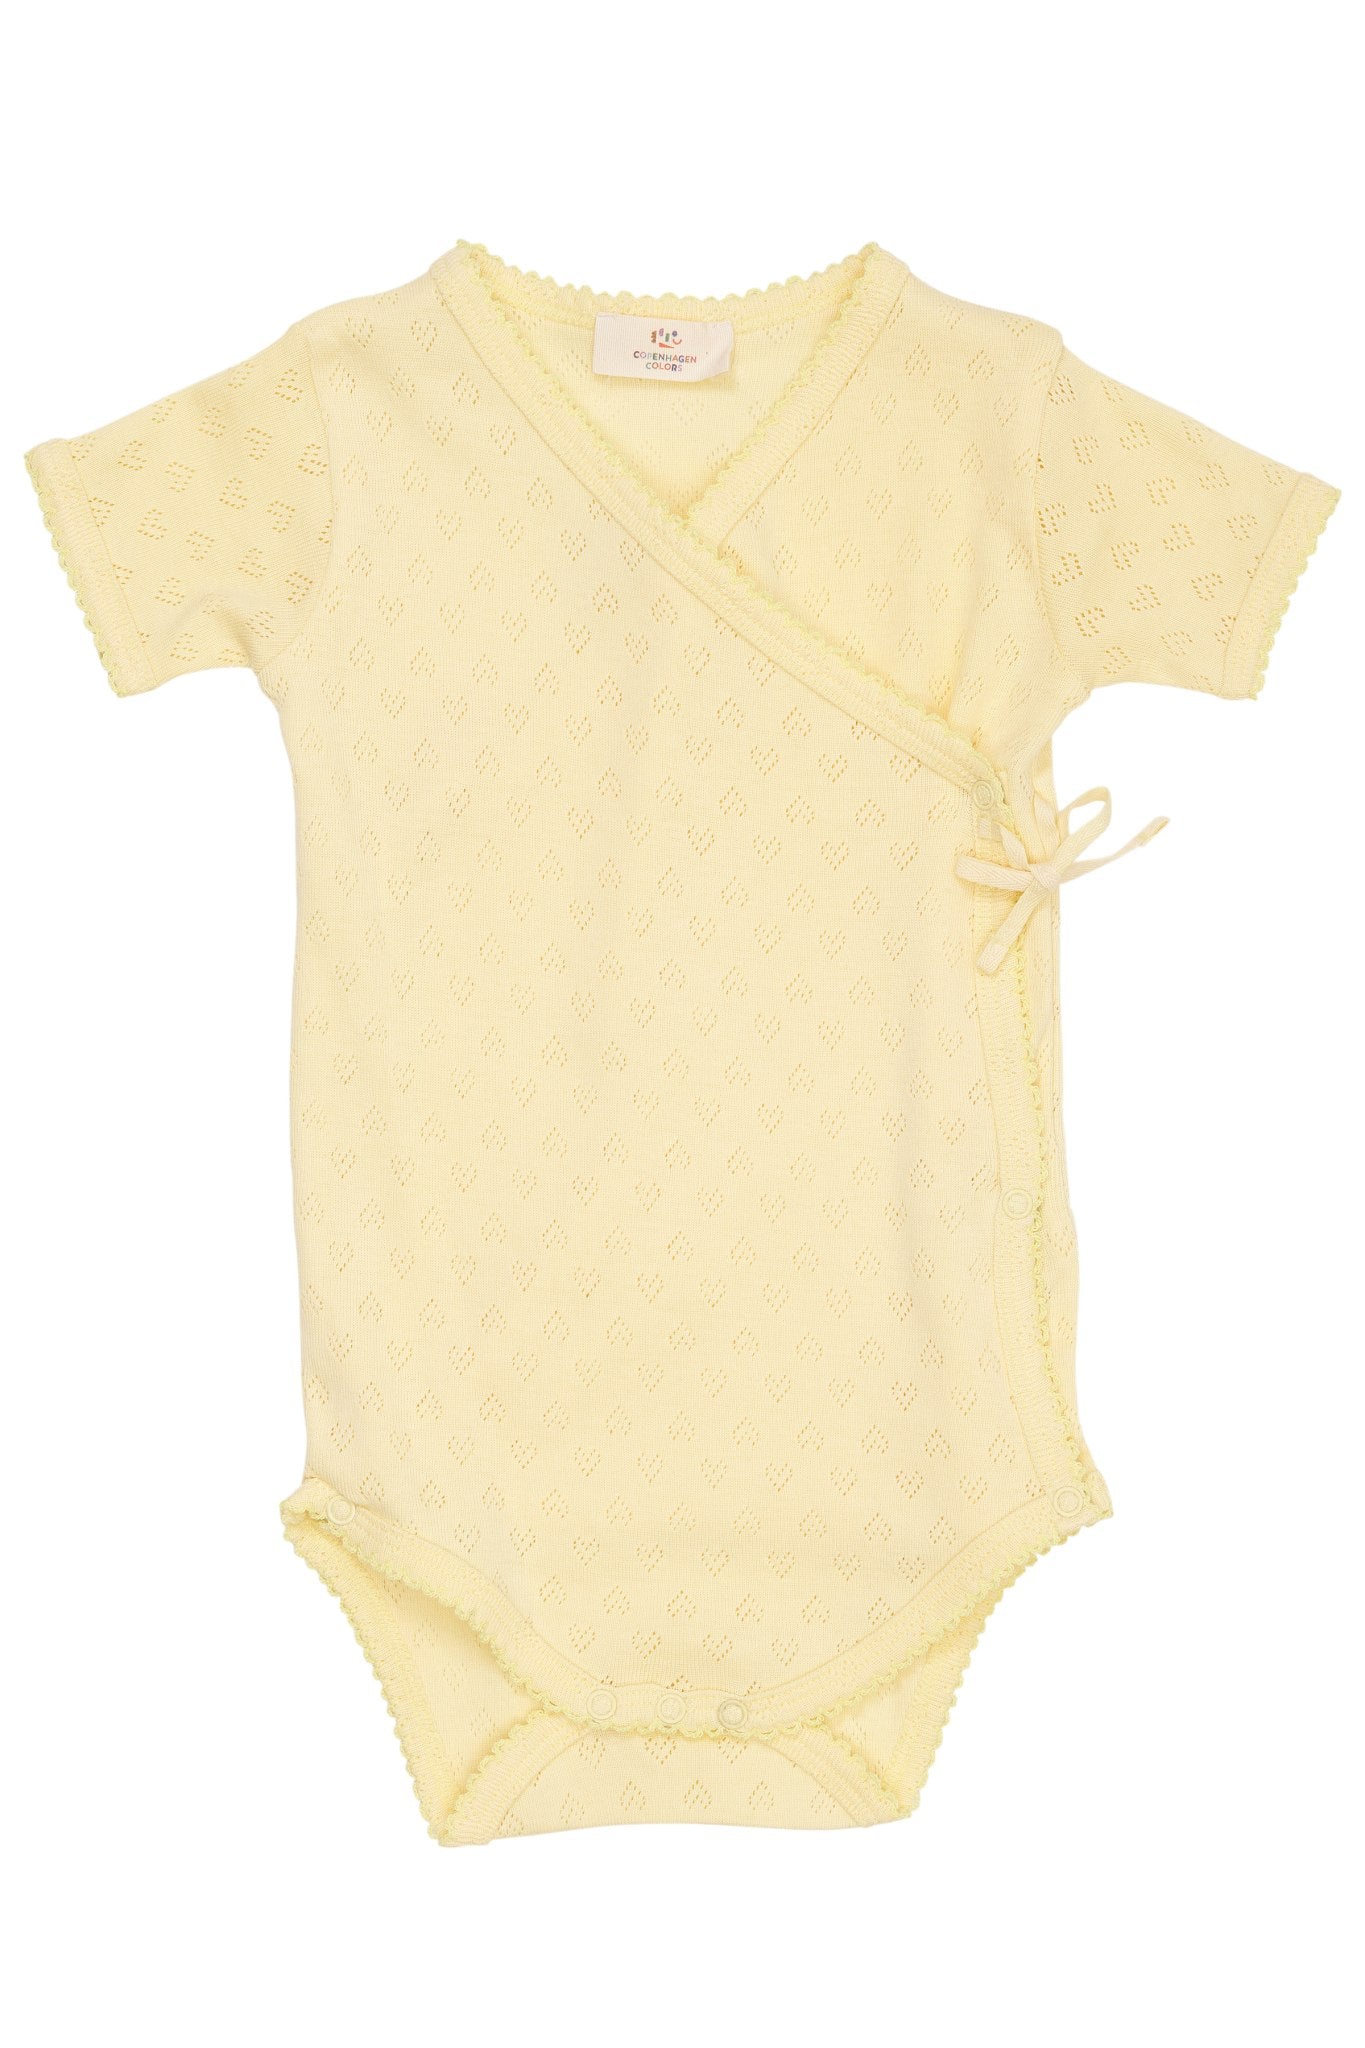 POINTELLE HEART CROSSOVER BODY SS - PALE YELLOW